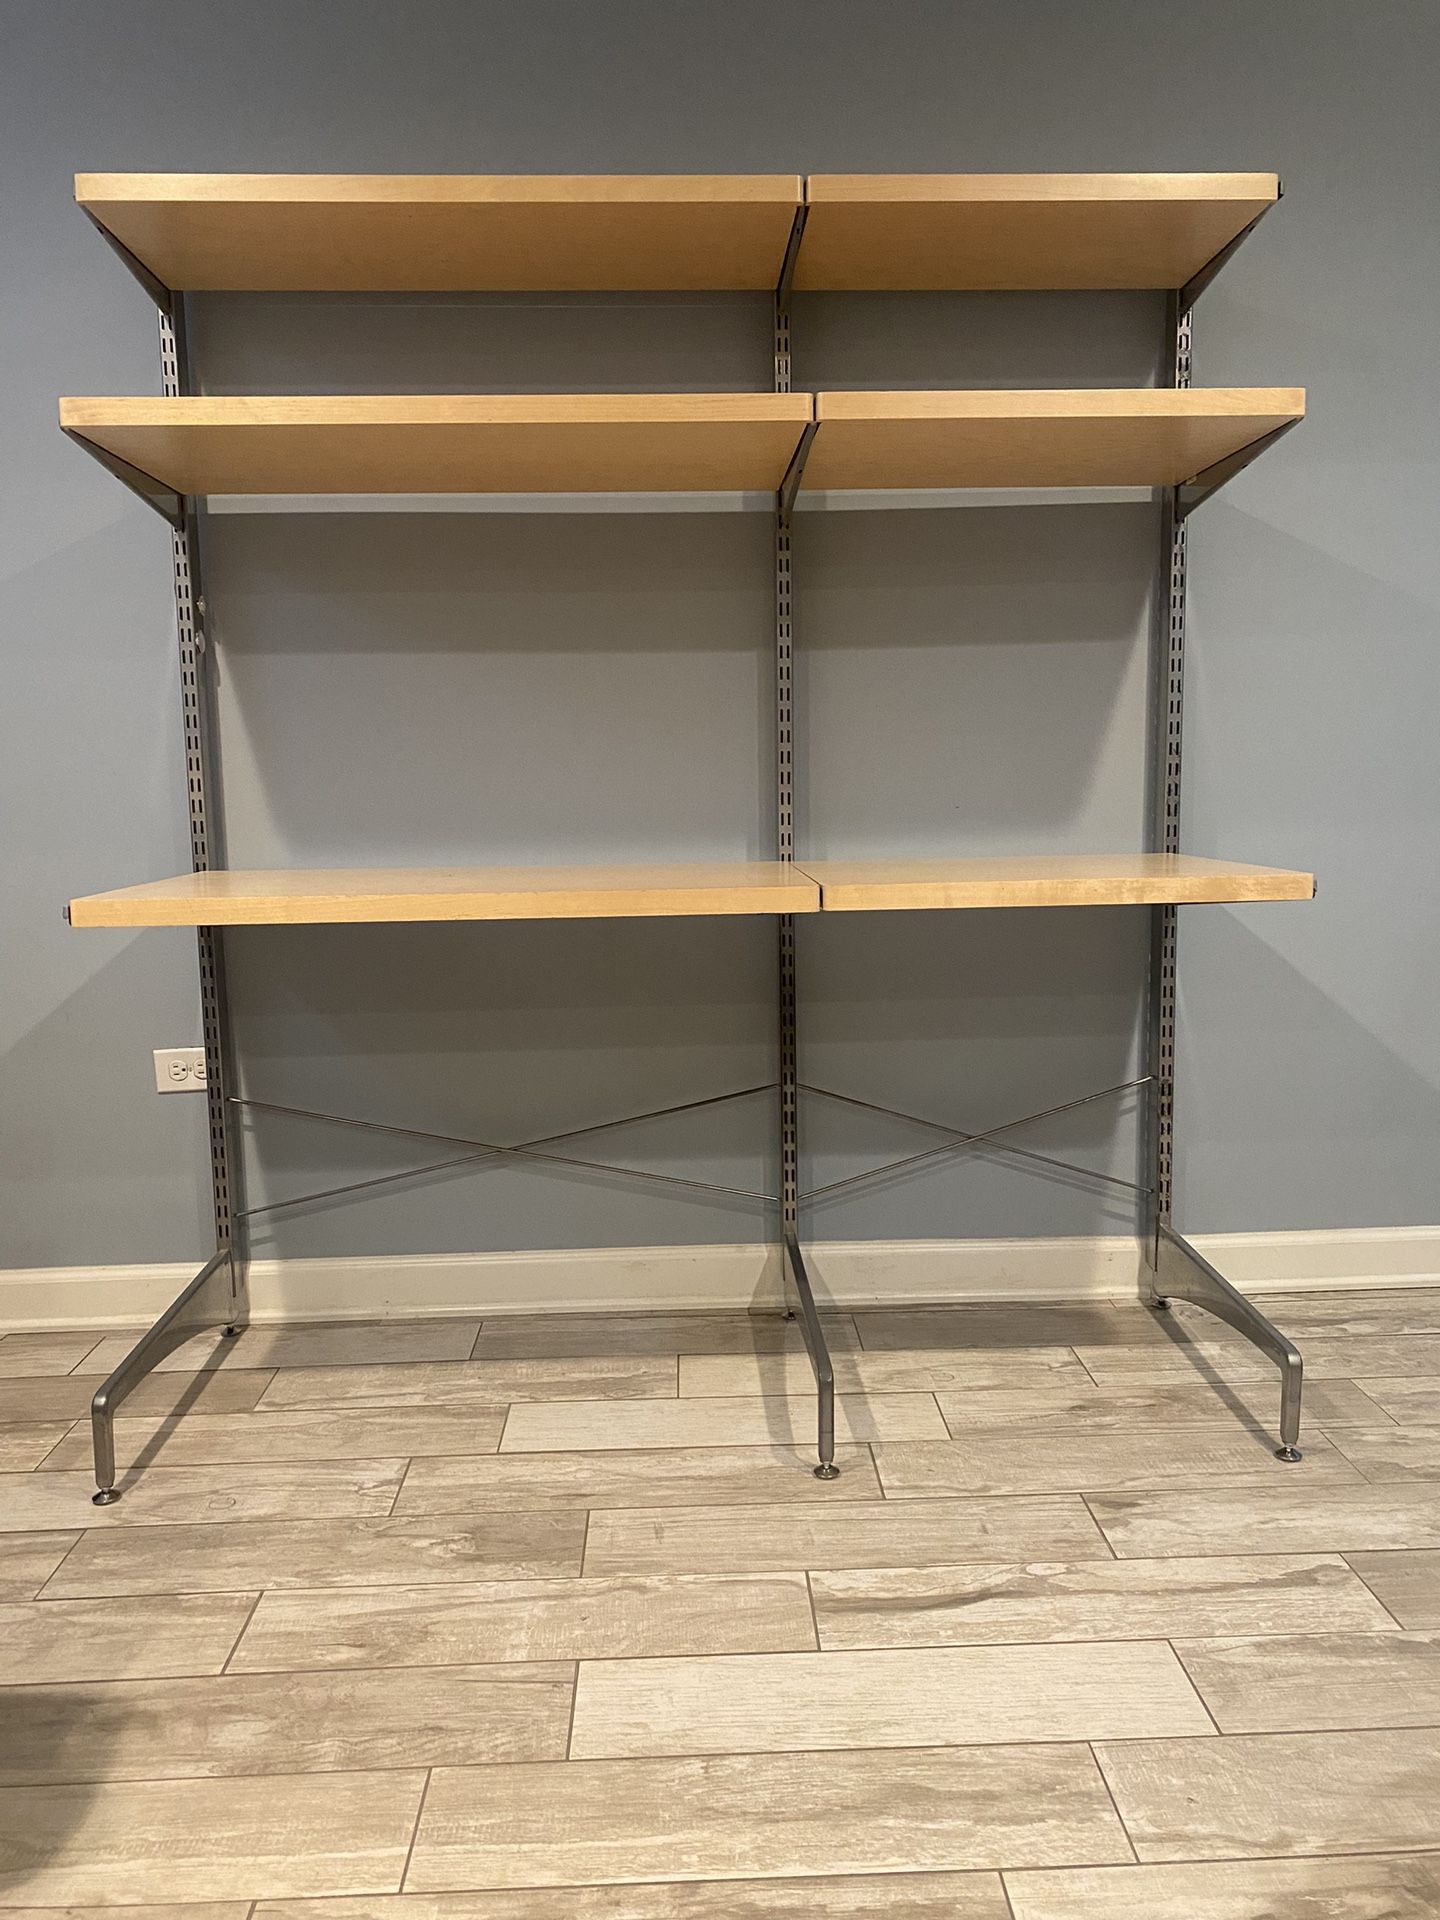 Freestanding Elfa Desk by Container Store